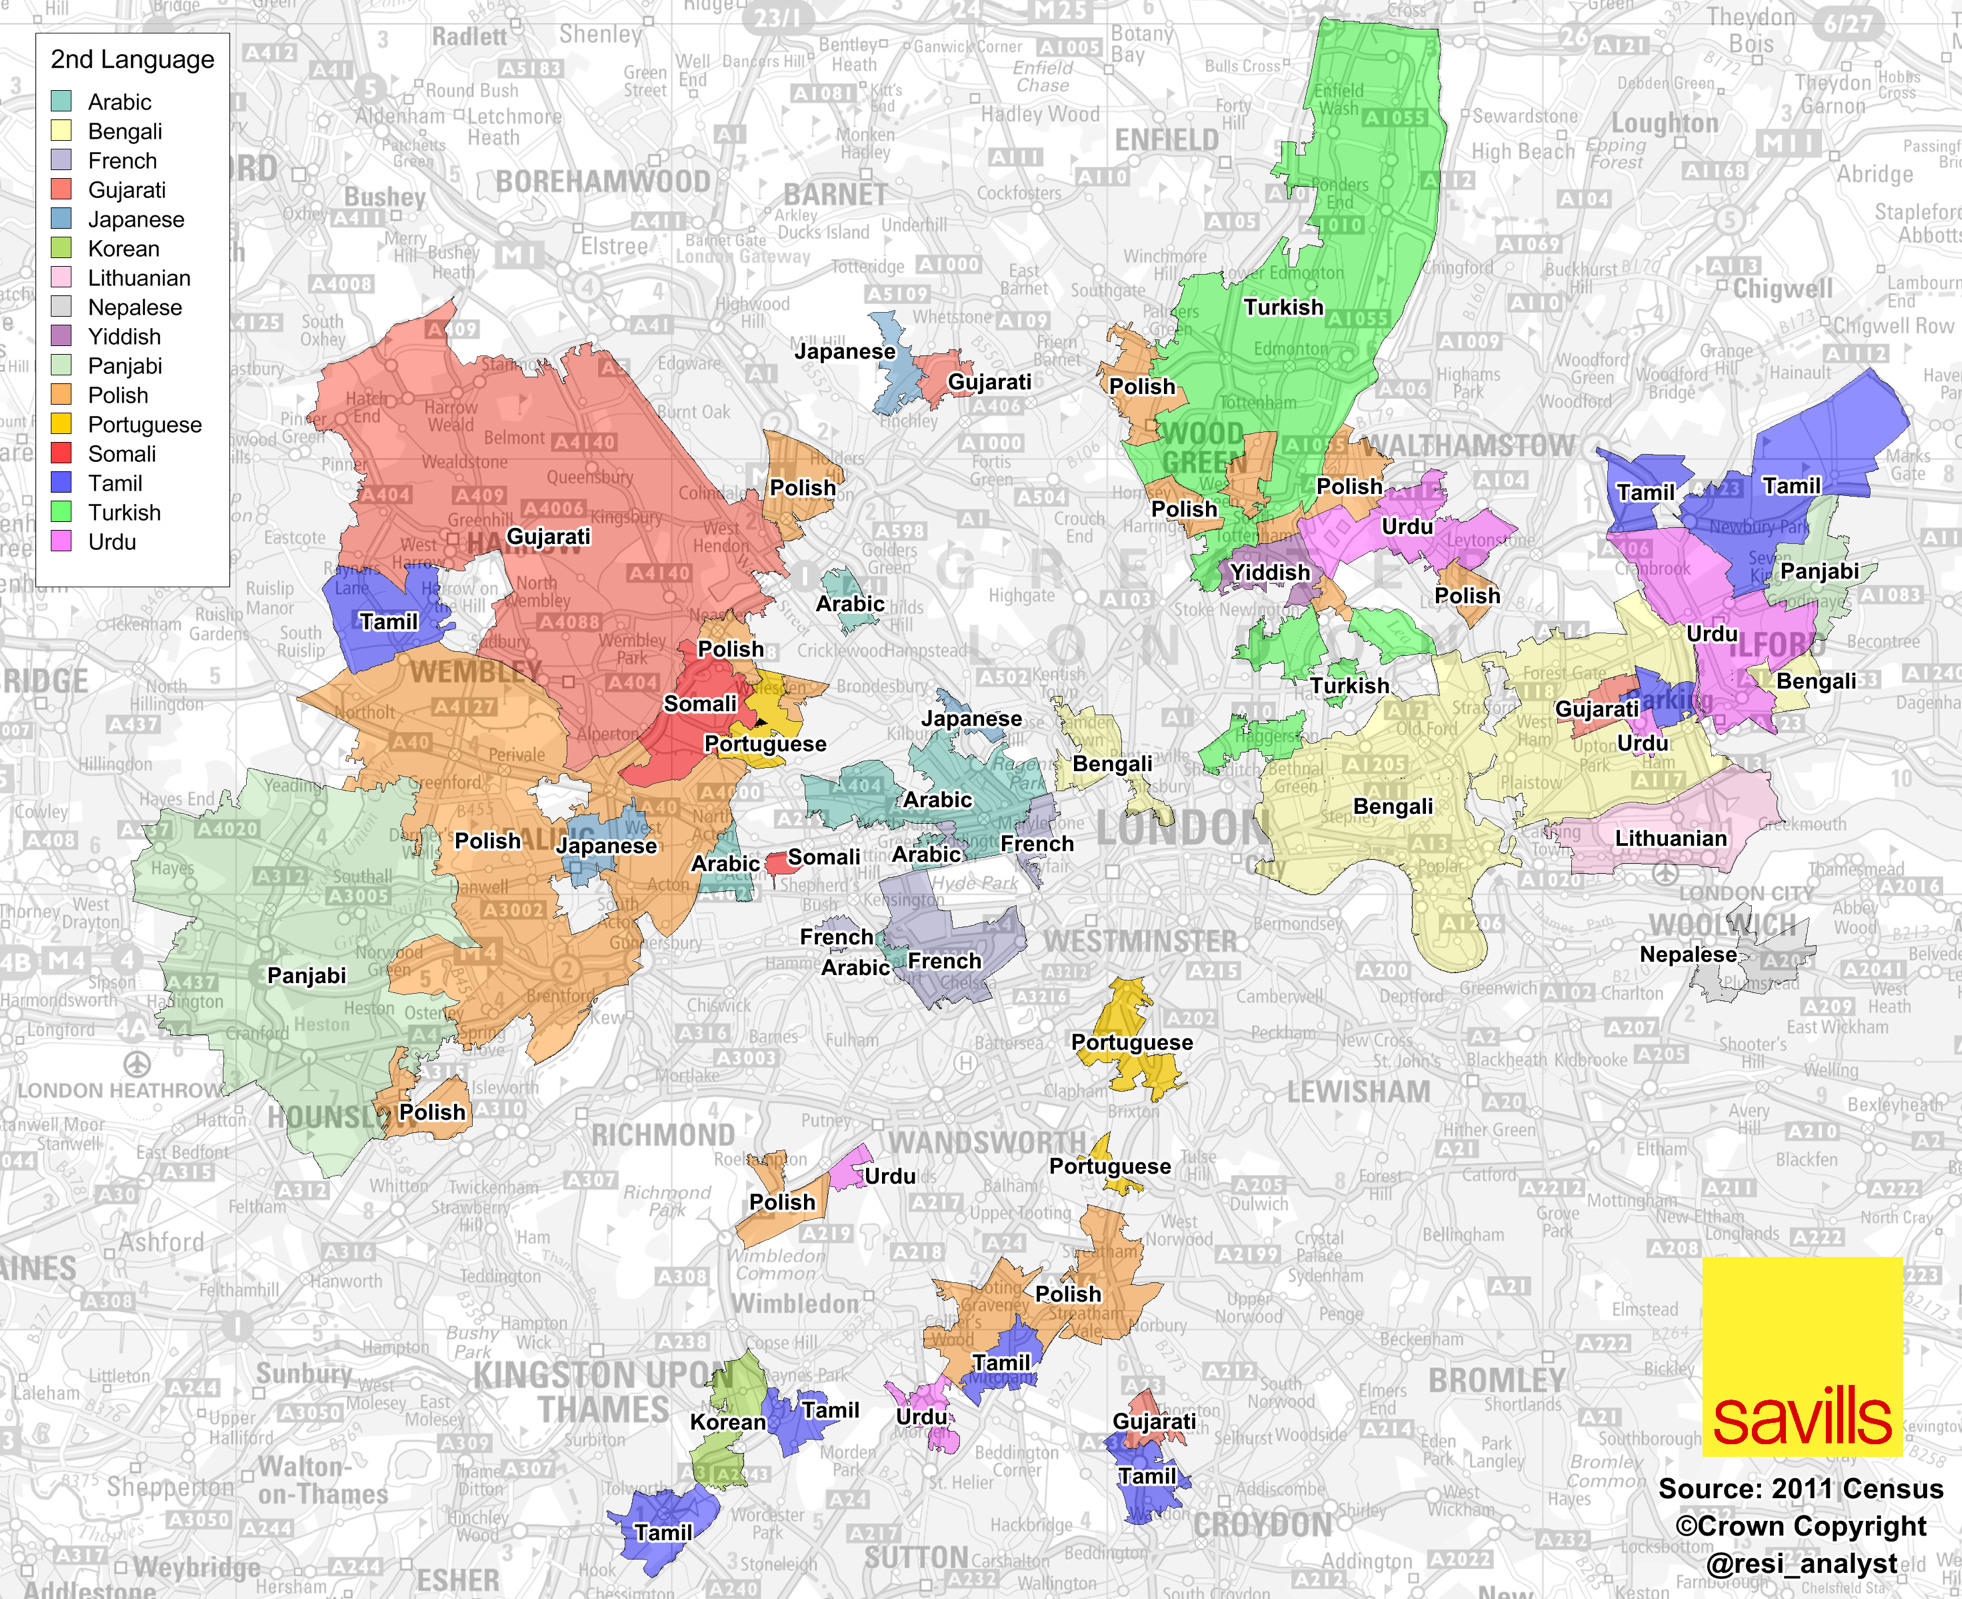 cliquez pour agrandir (source : http://now-here-this.timeout.com/2013/10/29/map-of-second-languages-spoken-in-london/)